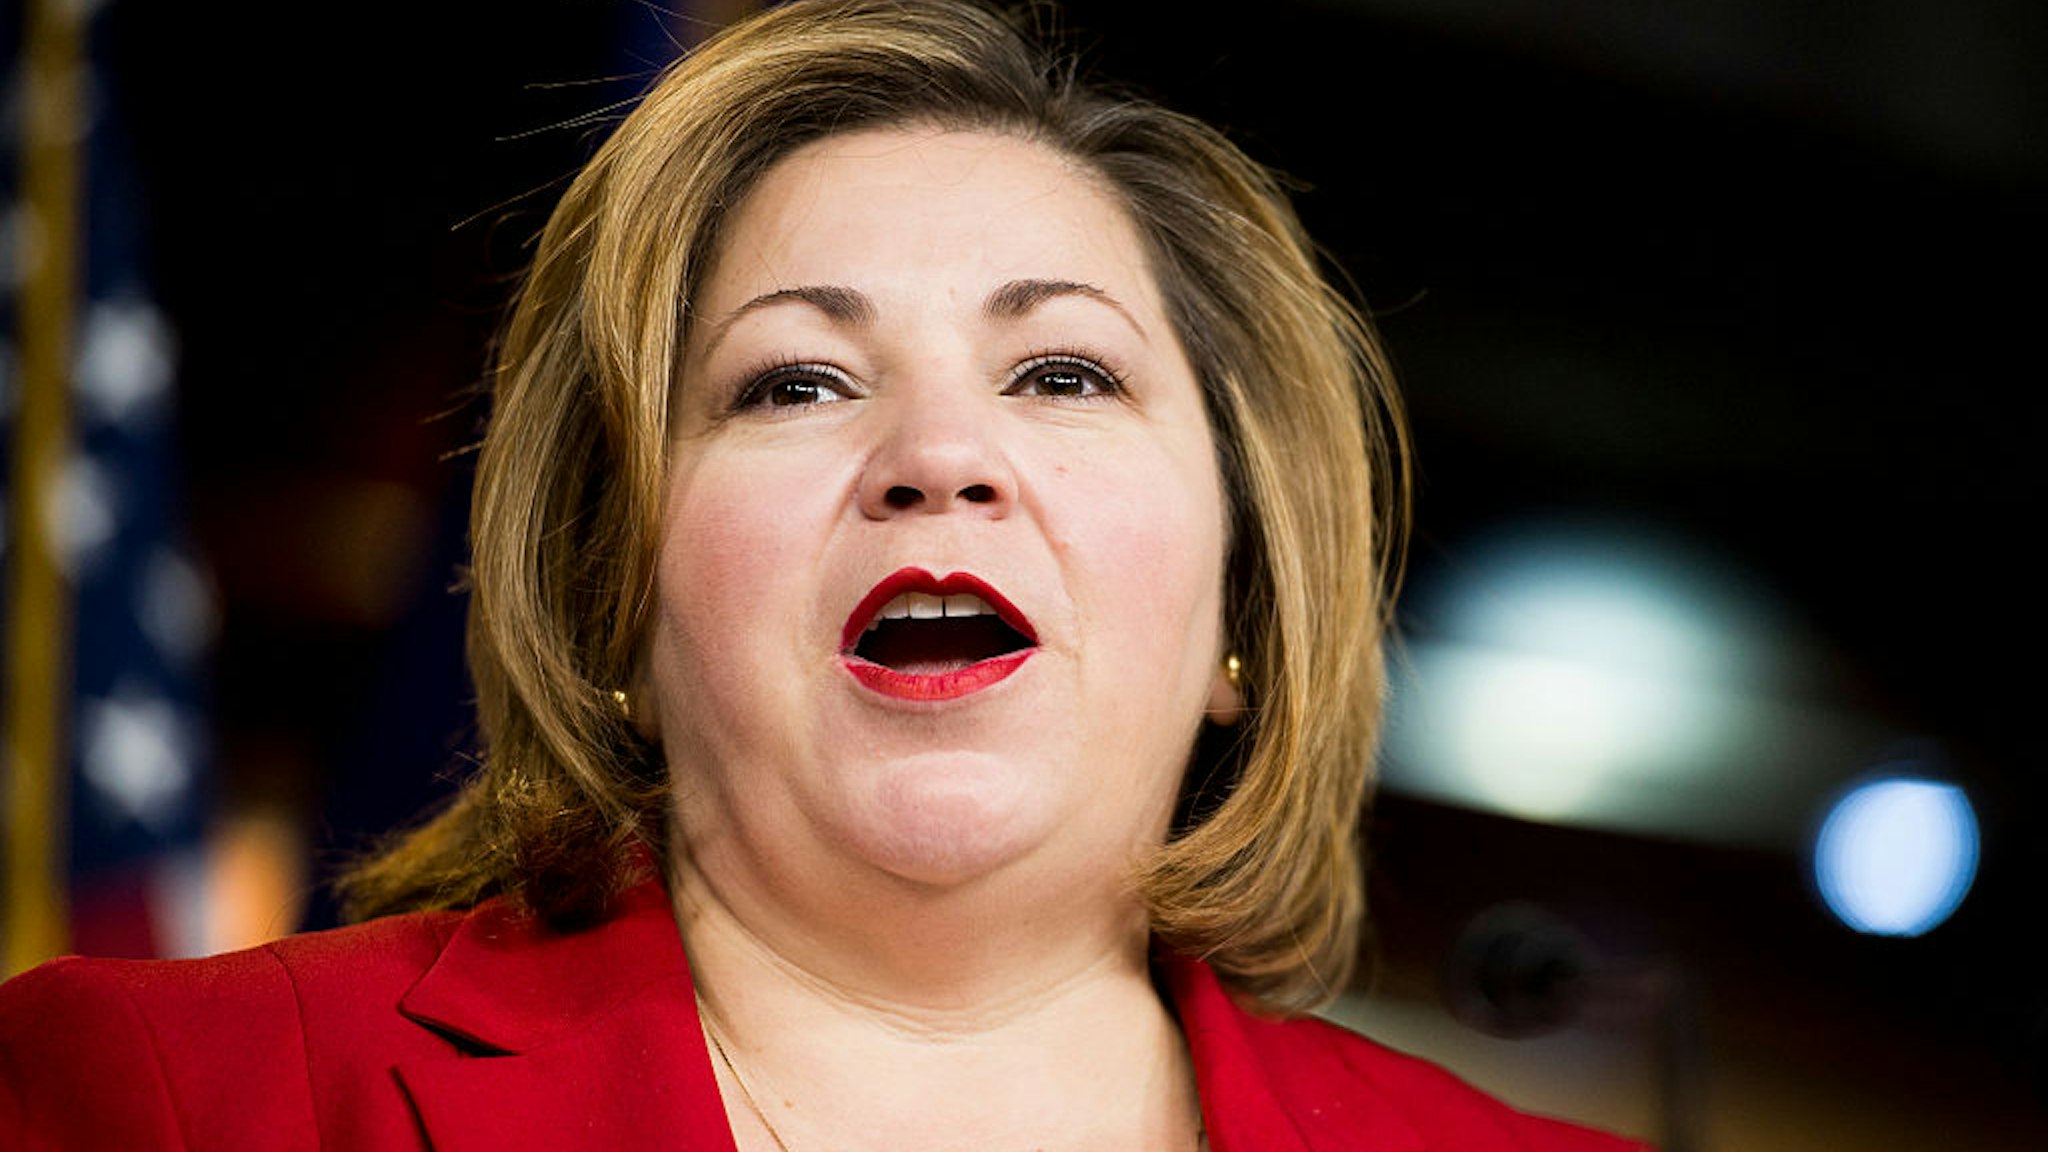 Rep. Linda Sanchez, D-Calif., speaks as members of the Congressional Hispanic Caucus hold a news conference to speak out against the House Republican budget and its impact on the Latino community on Tuesday, March 24, 2015.